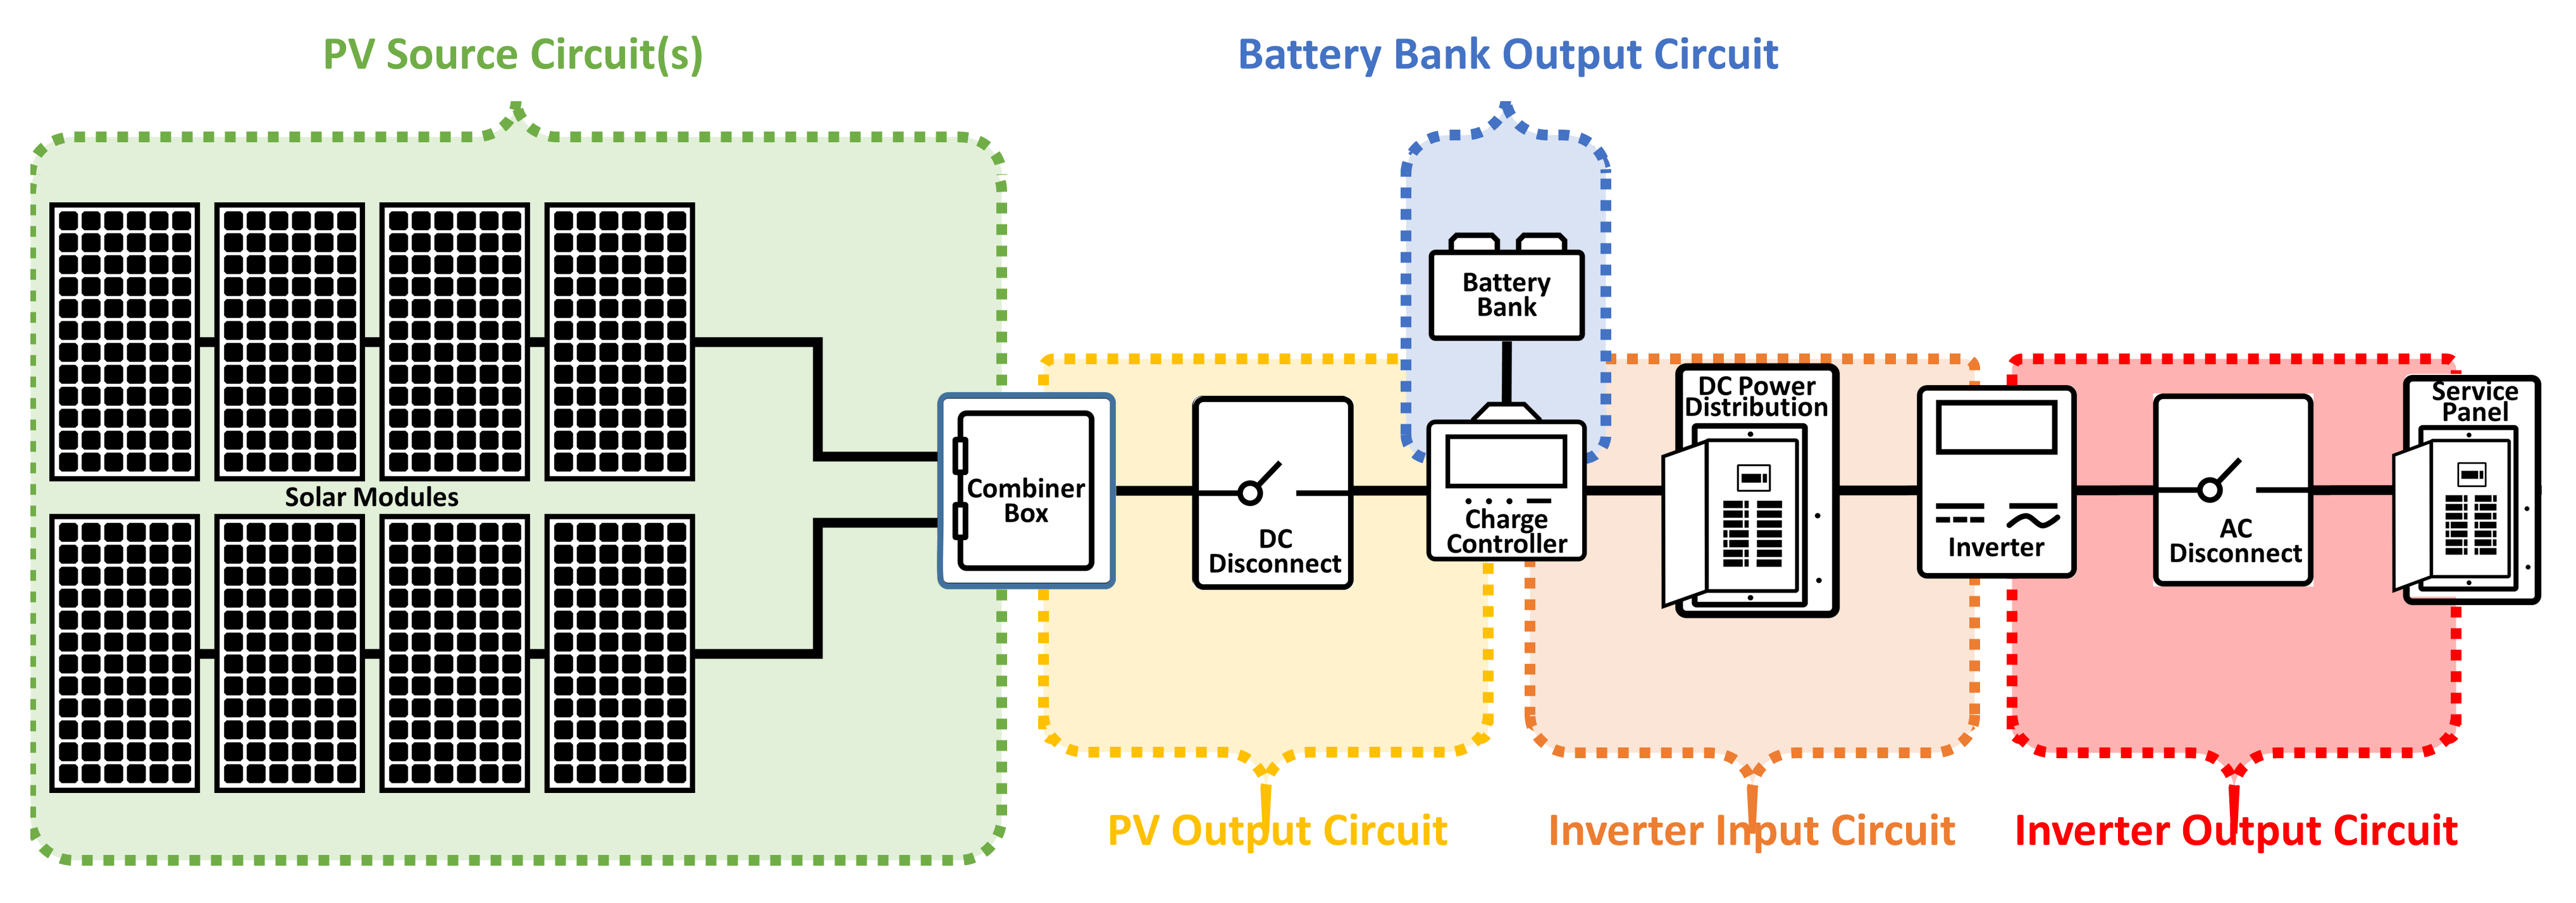 A diagram of typical components of a grid-tied system may include 1) a PV source circuit, 2) PV output circuit, 3) inverter input circuit, and 4) inverter output circuit. 